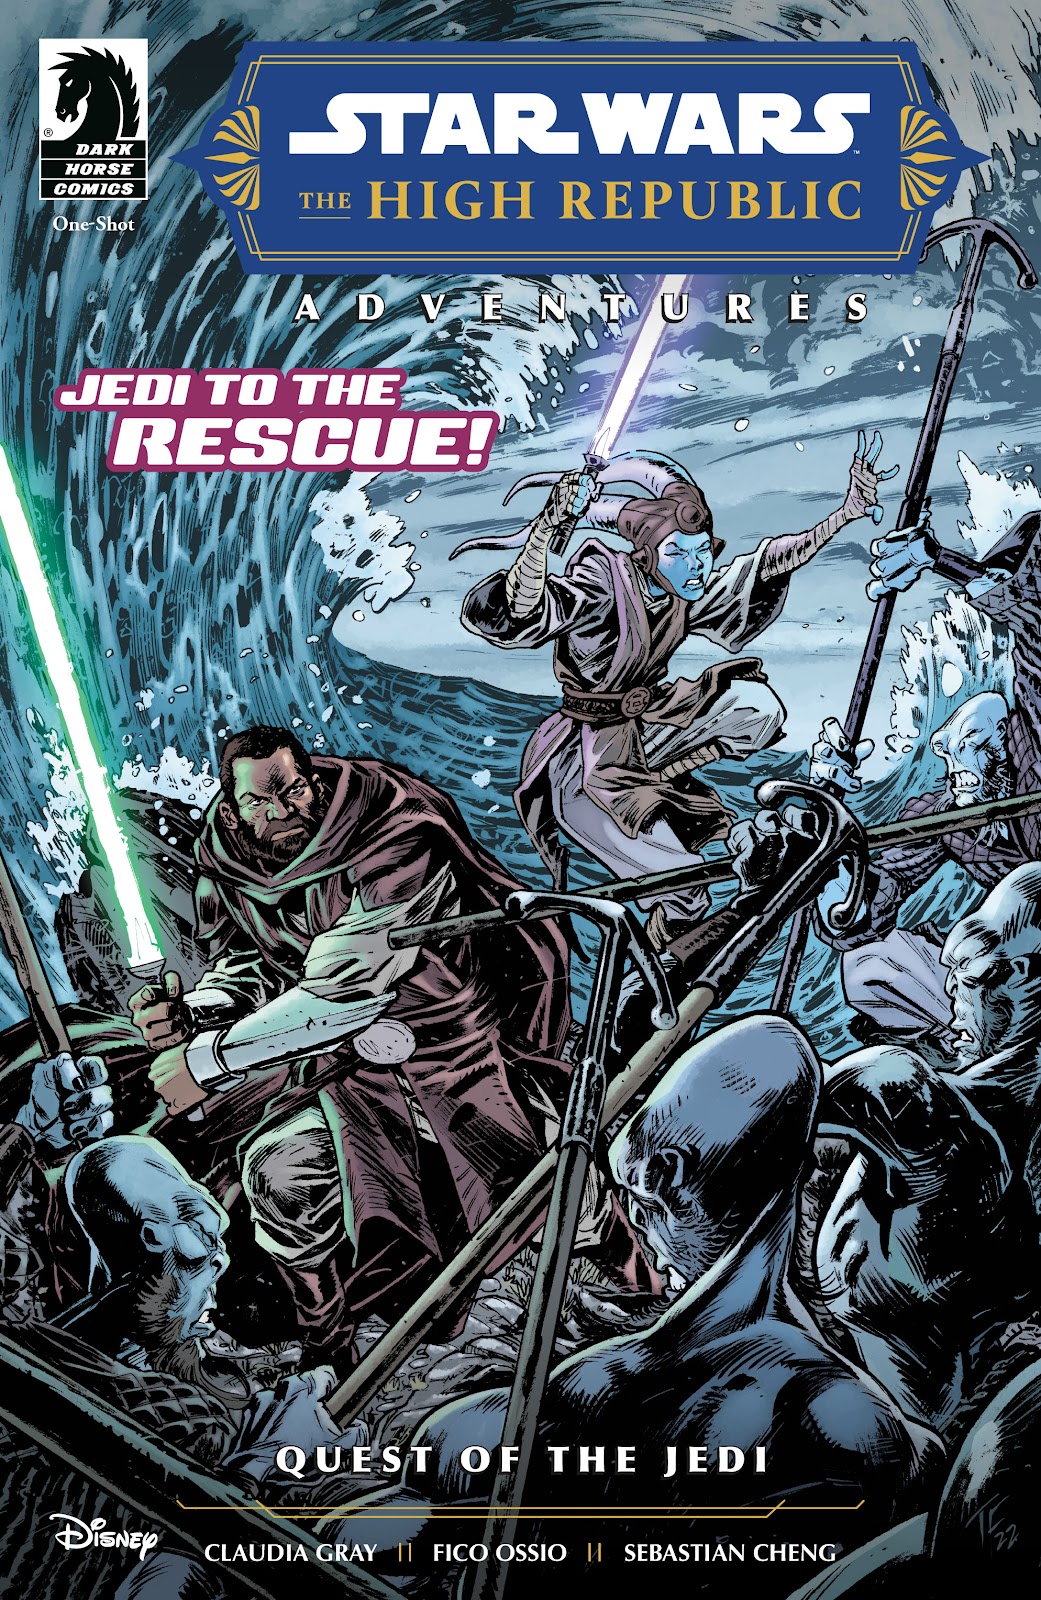 Star Wars: The High Republic Adventures - Quest of the Jedi Full Page 1